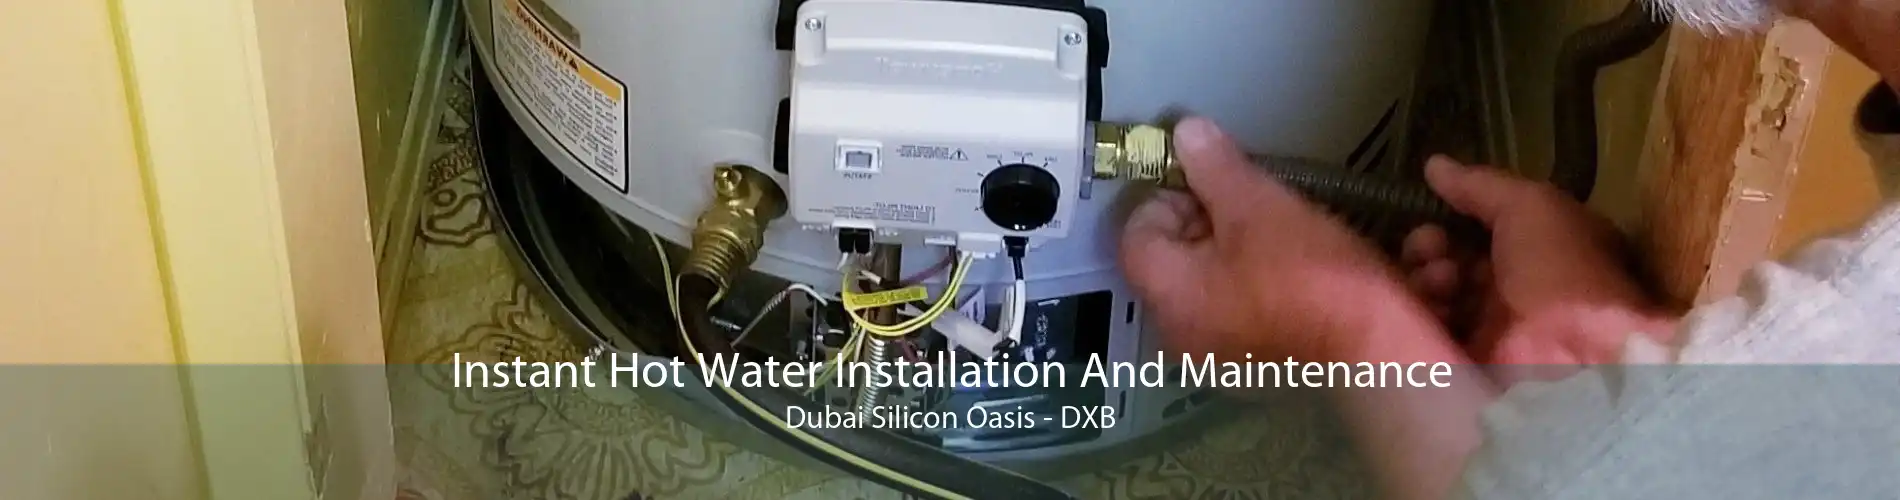 Instant Hot Water Installation And Maintenance Dubai Silicon Oasis - DXB